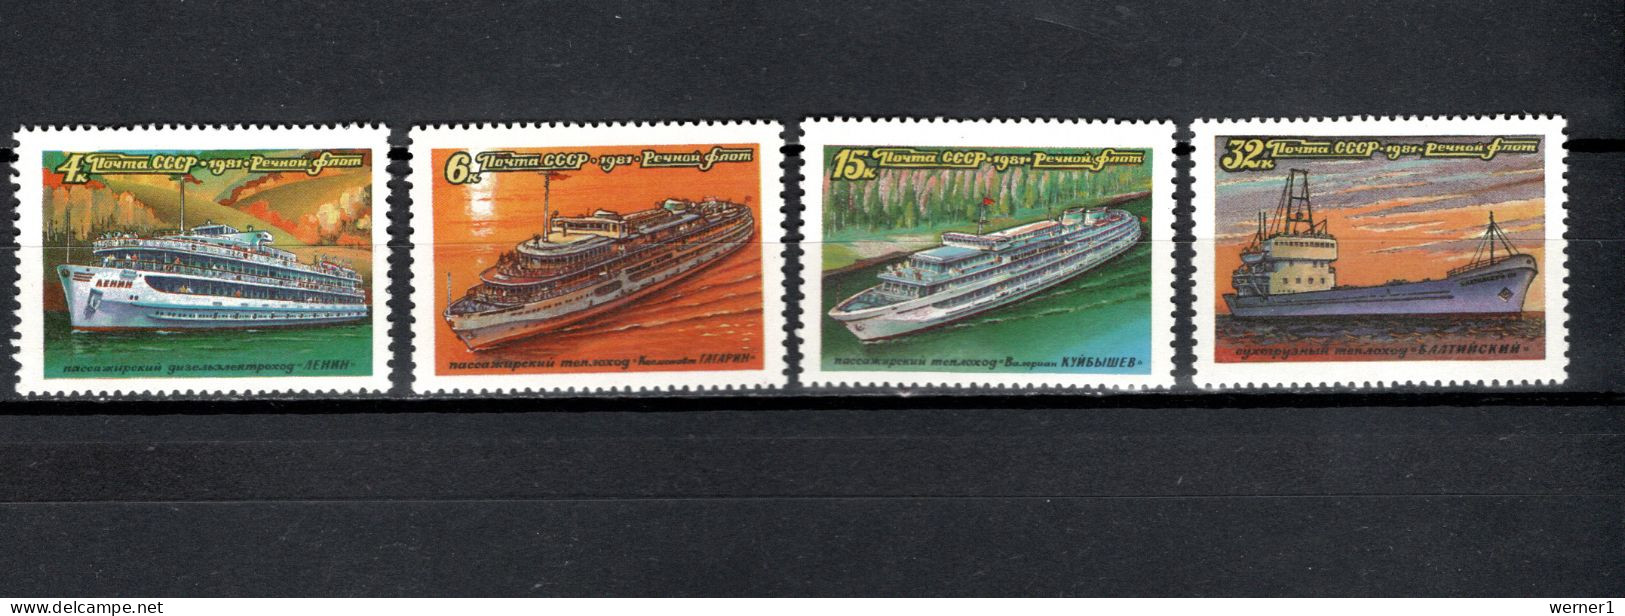 USSR Russia 1981 Space, Ships Set Of 4 MNH - Rusia & URSS